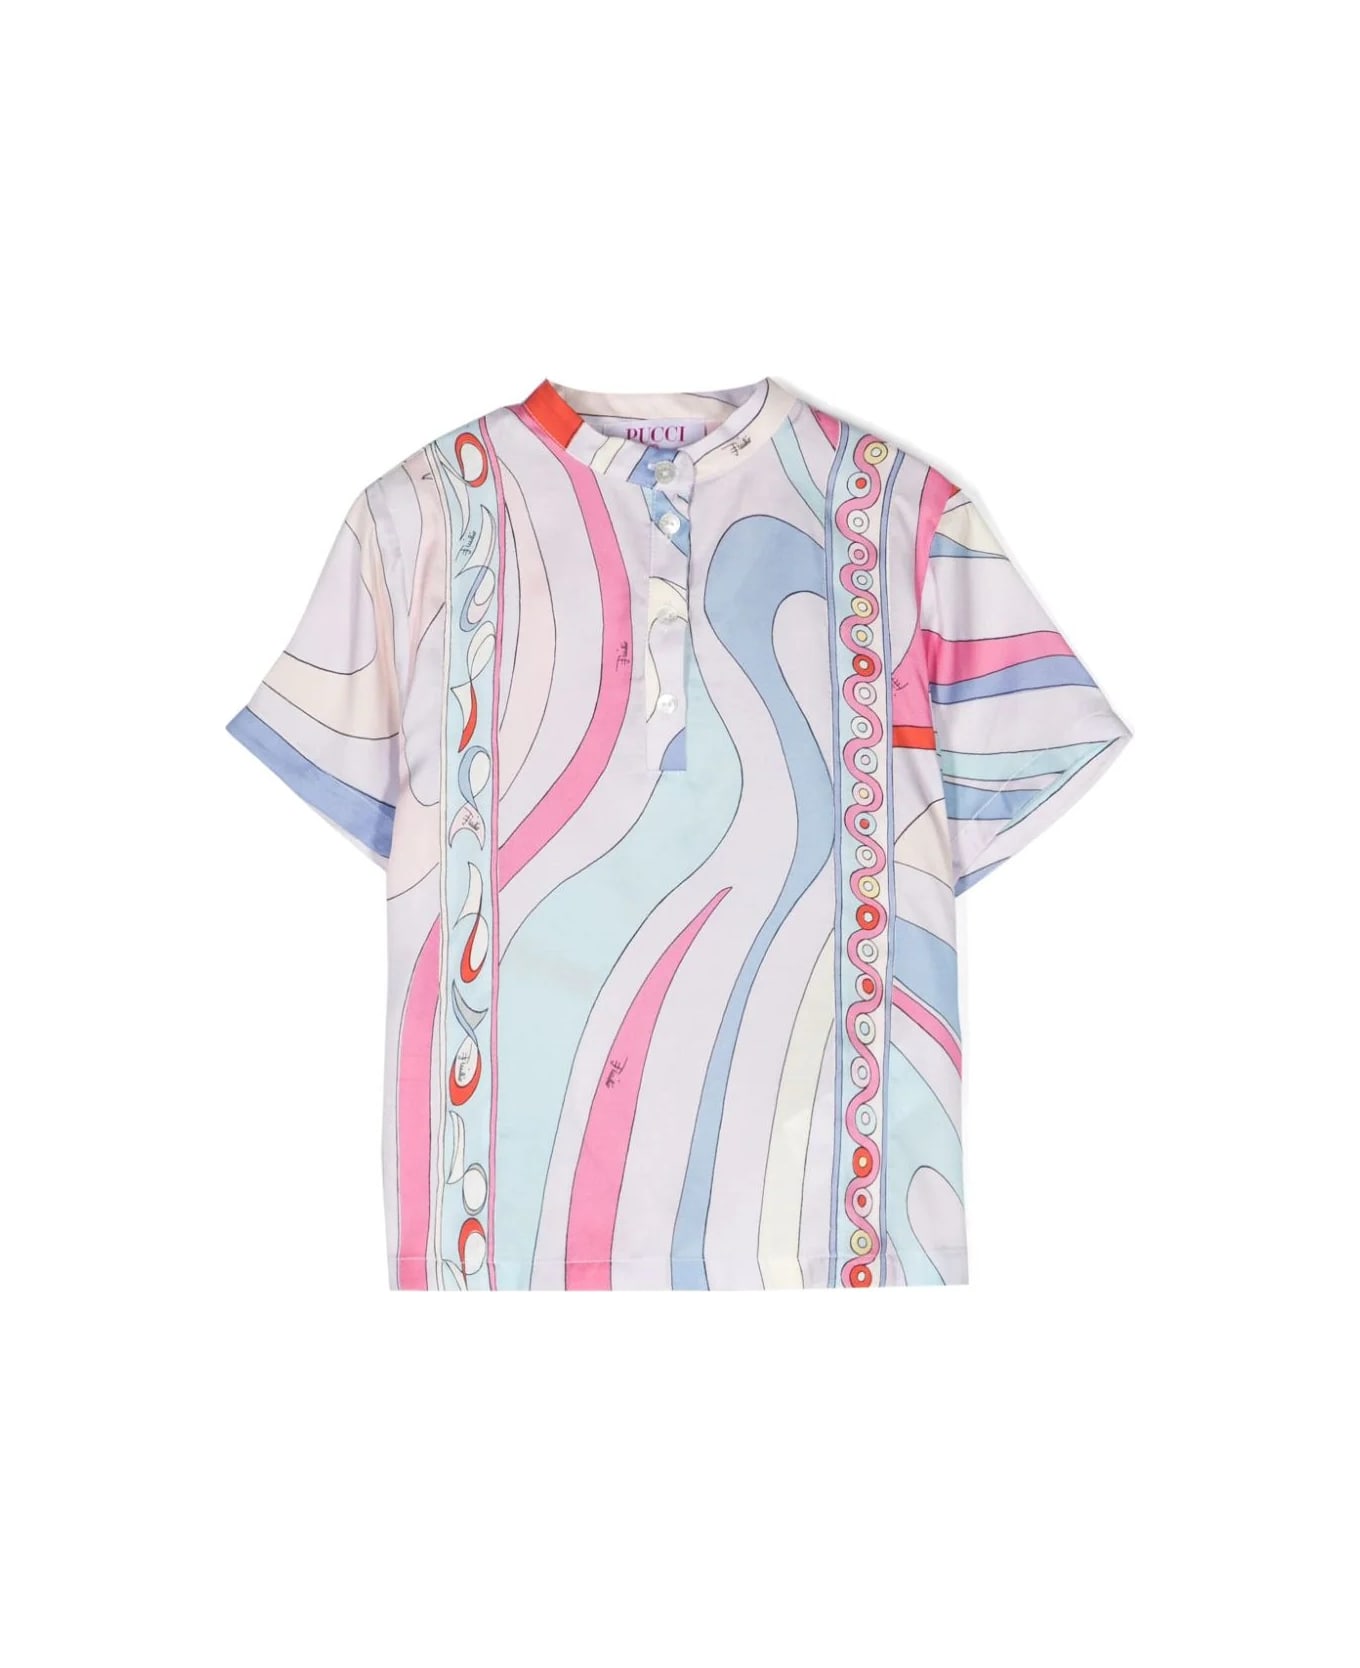 Pucci Short-sleeved Shirt With Light Blue/multicolour Iride Print - Blue シャツ